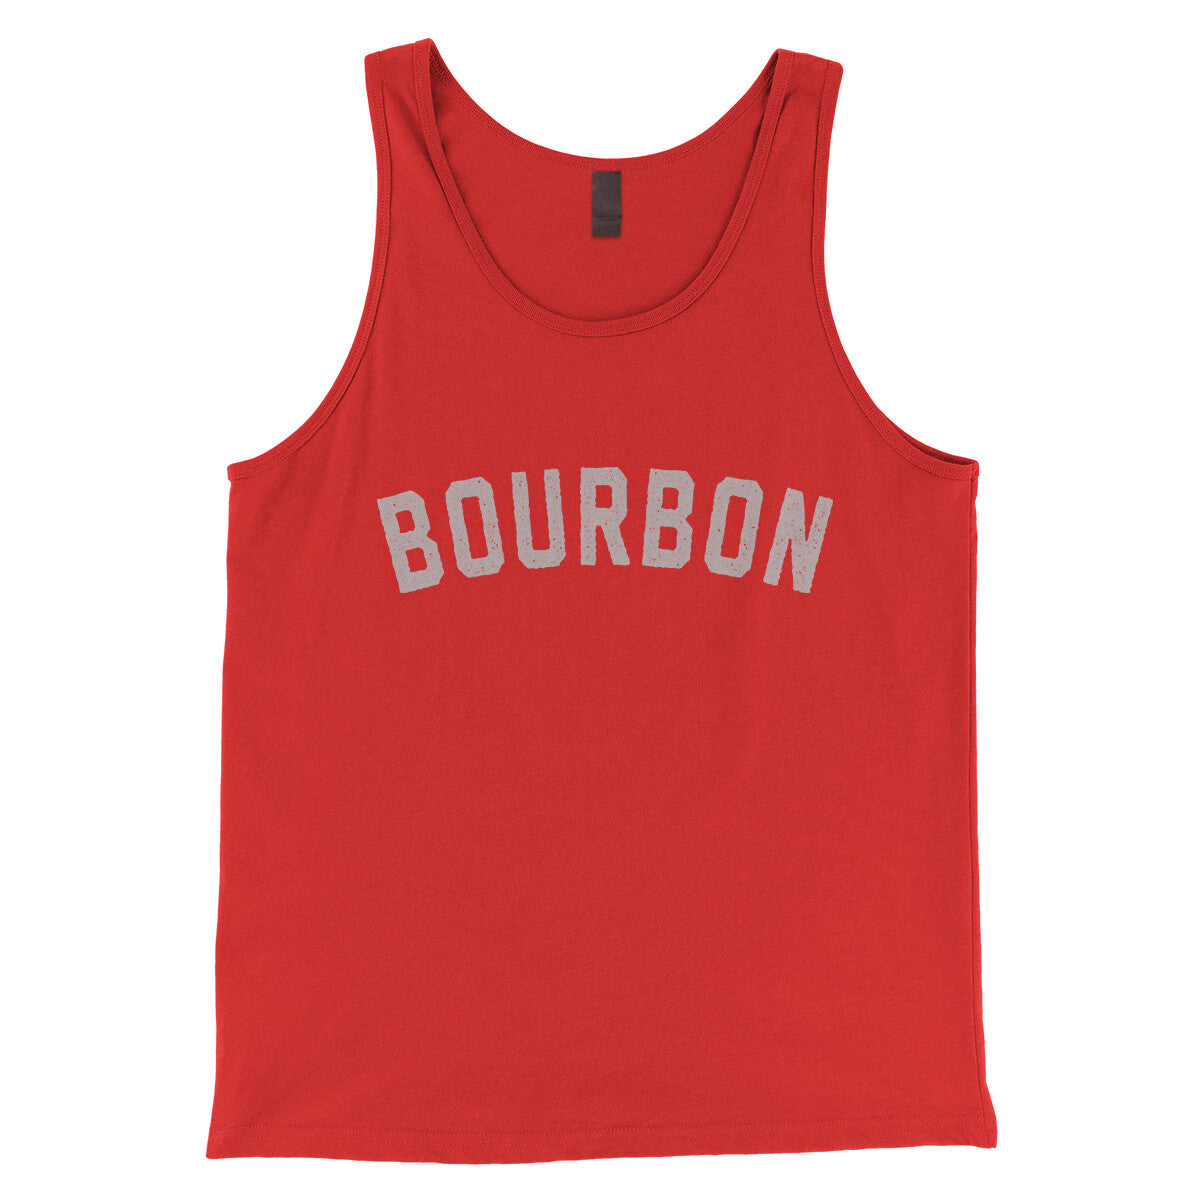 Bourbon in Red Color